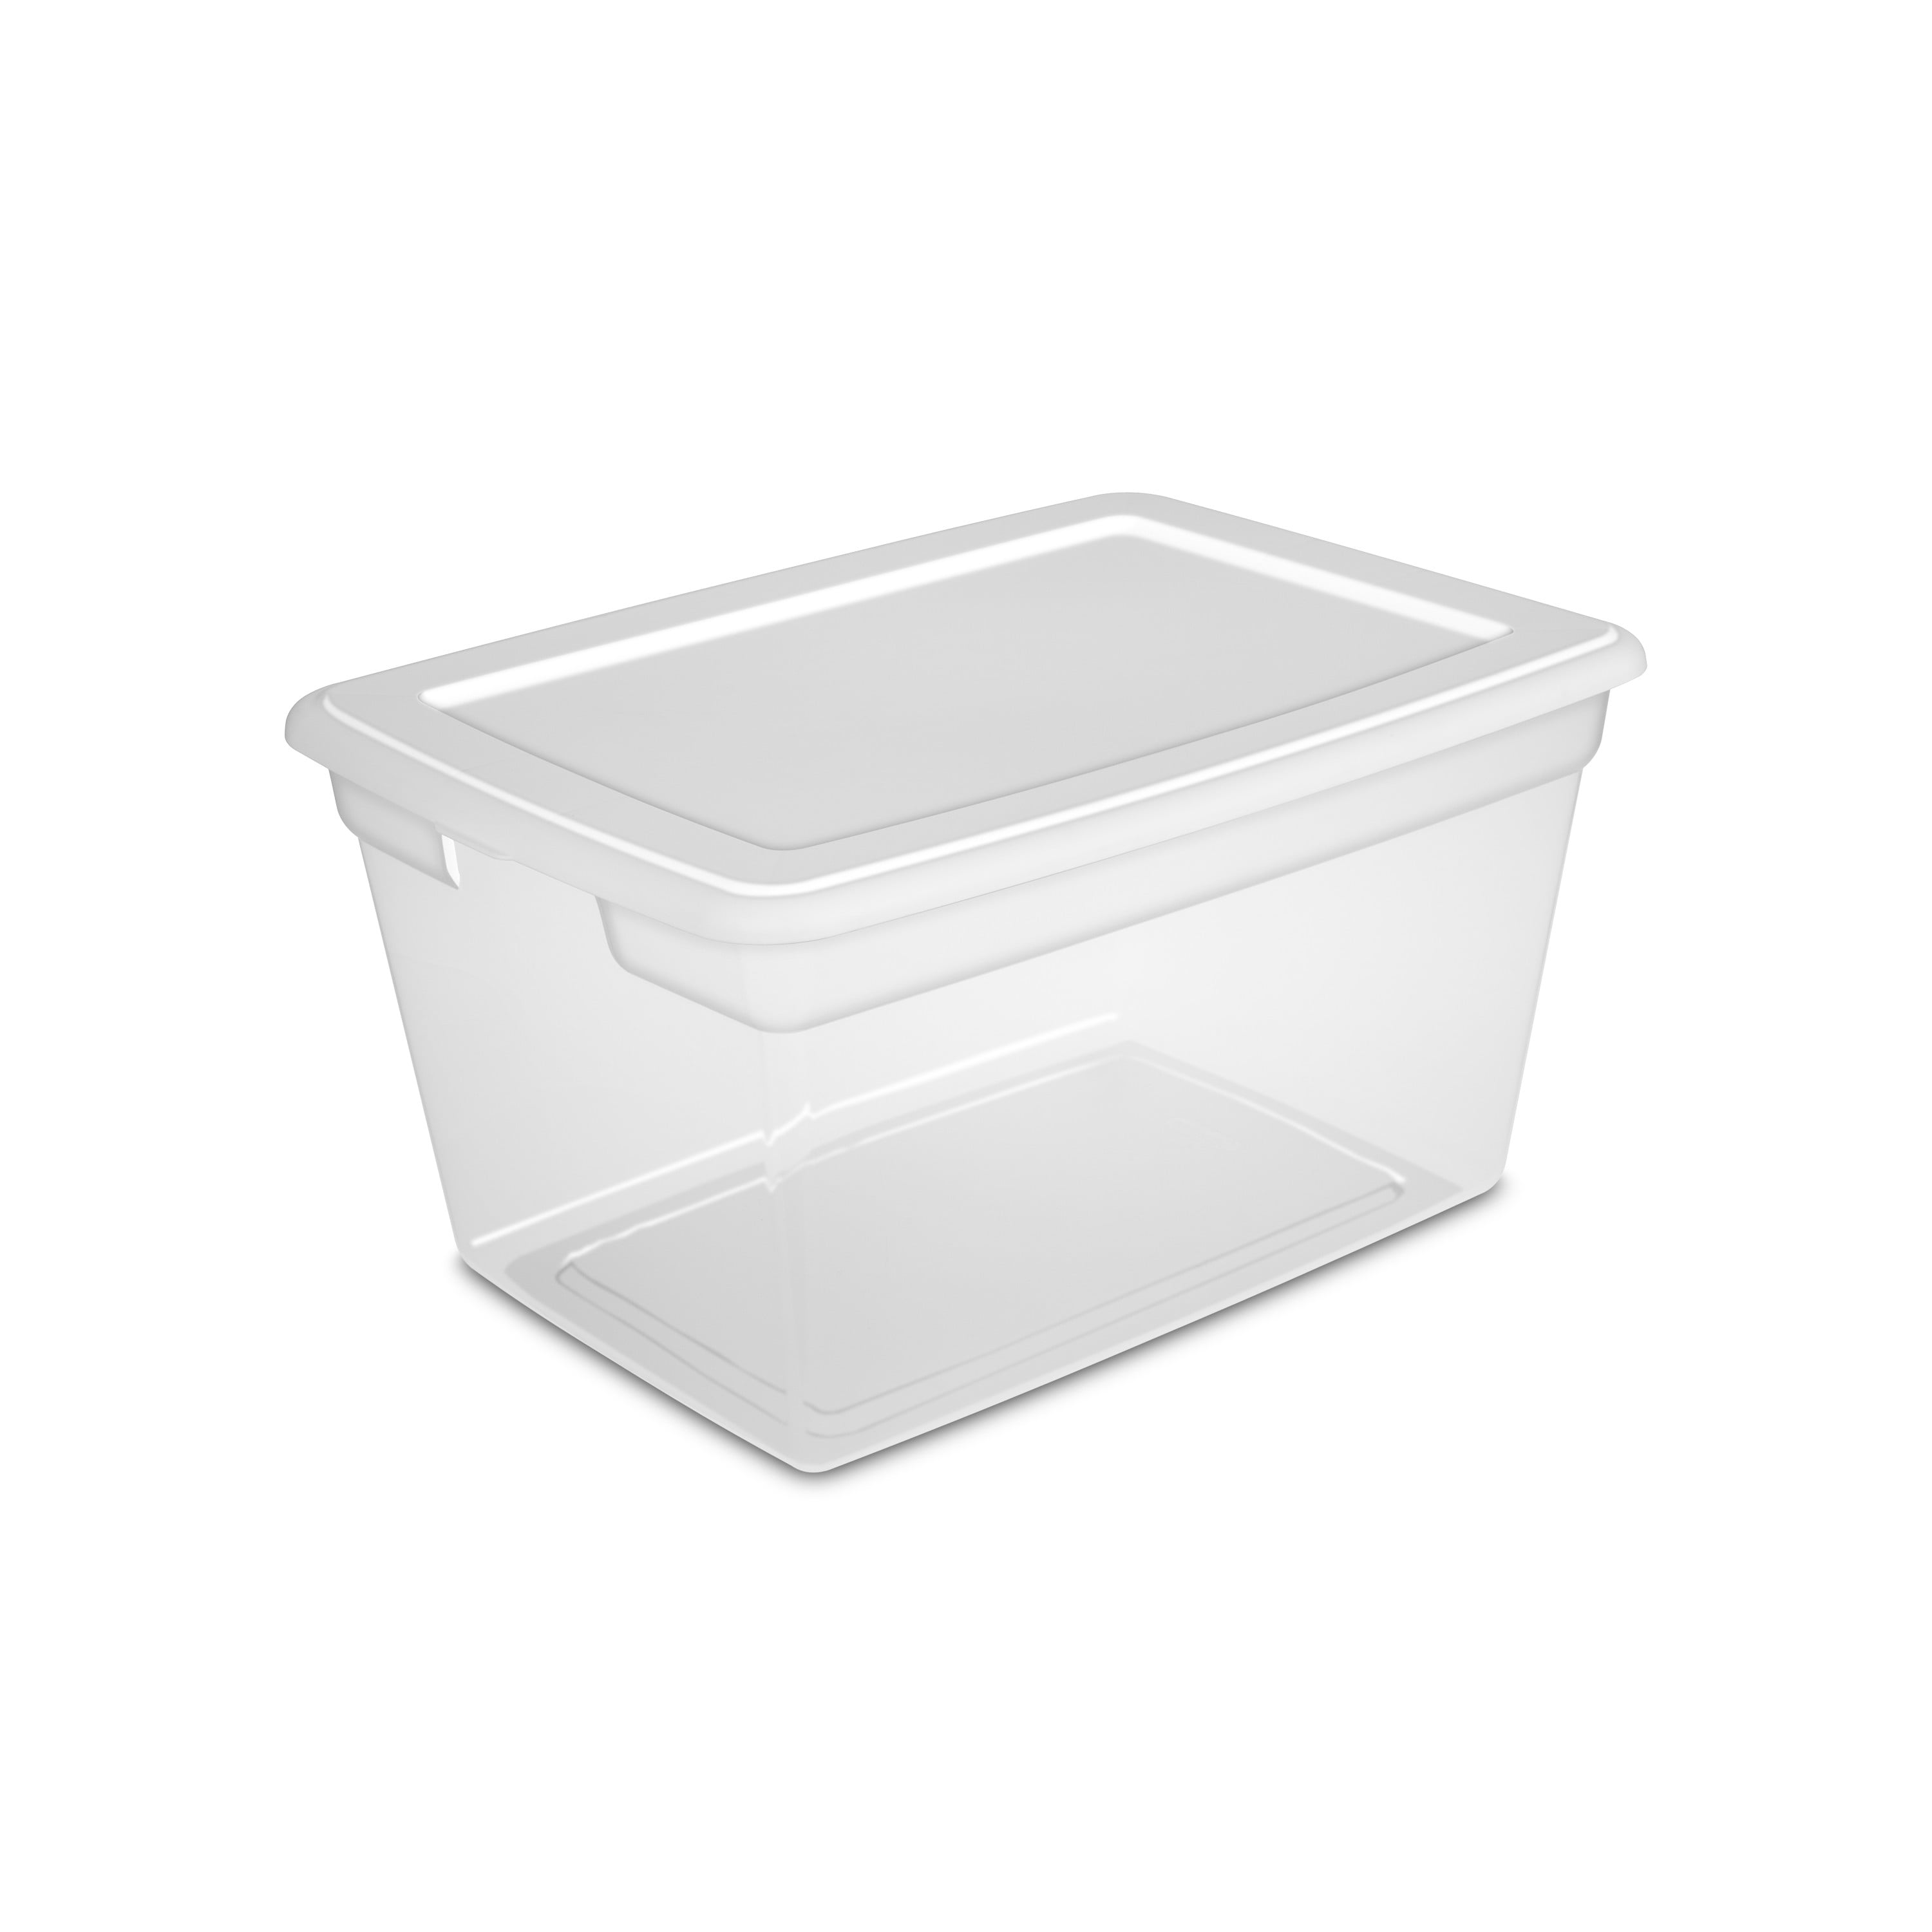 Small Desk Plastic Storage Box Boxes With Lids Removals House Home Office 